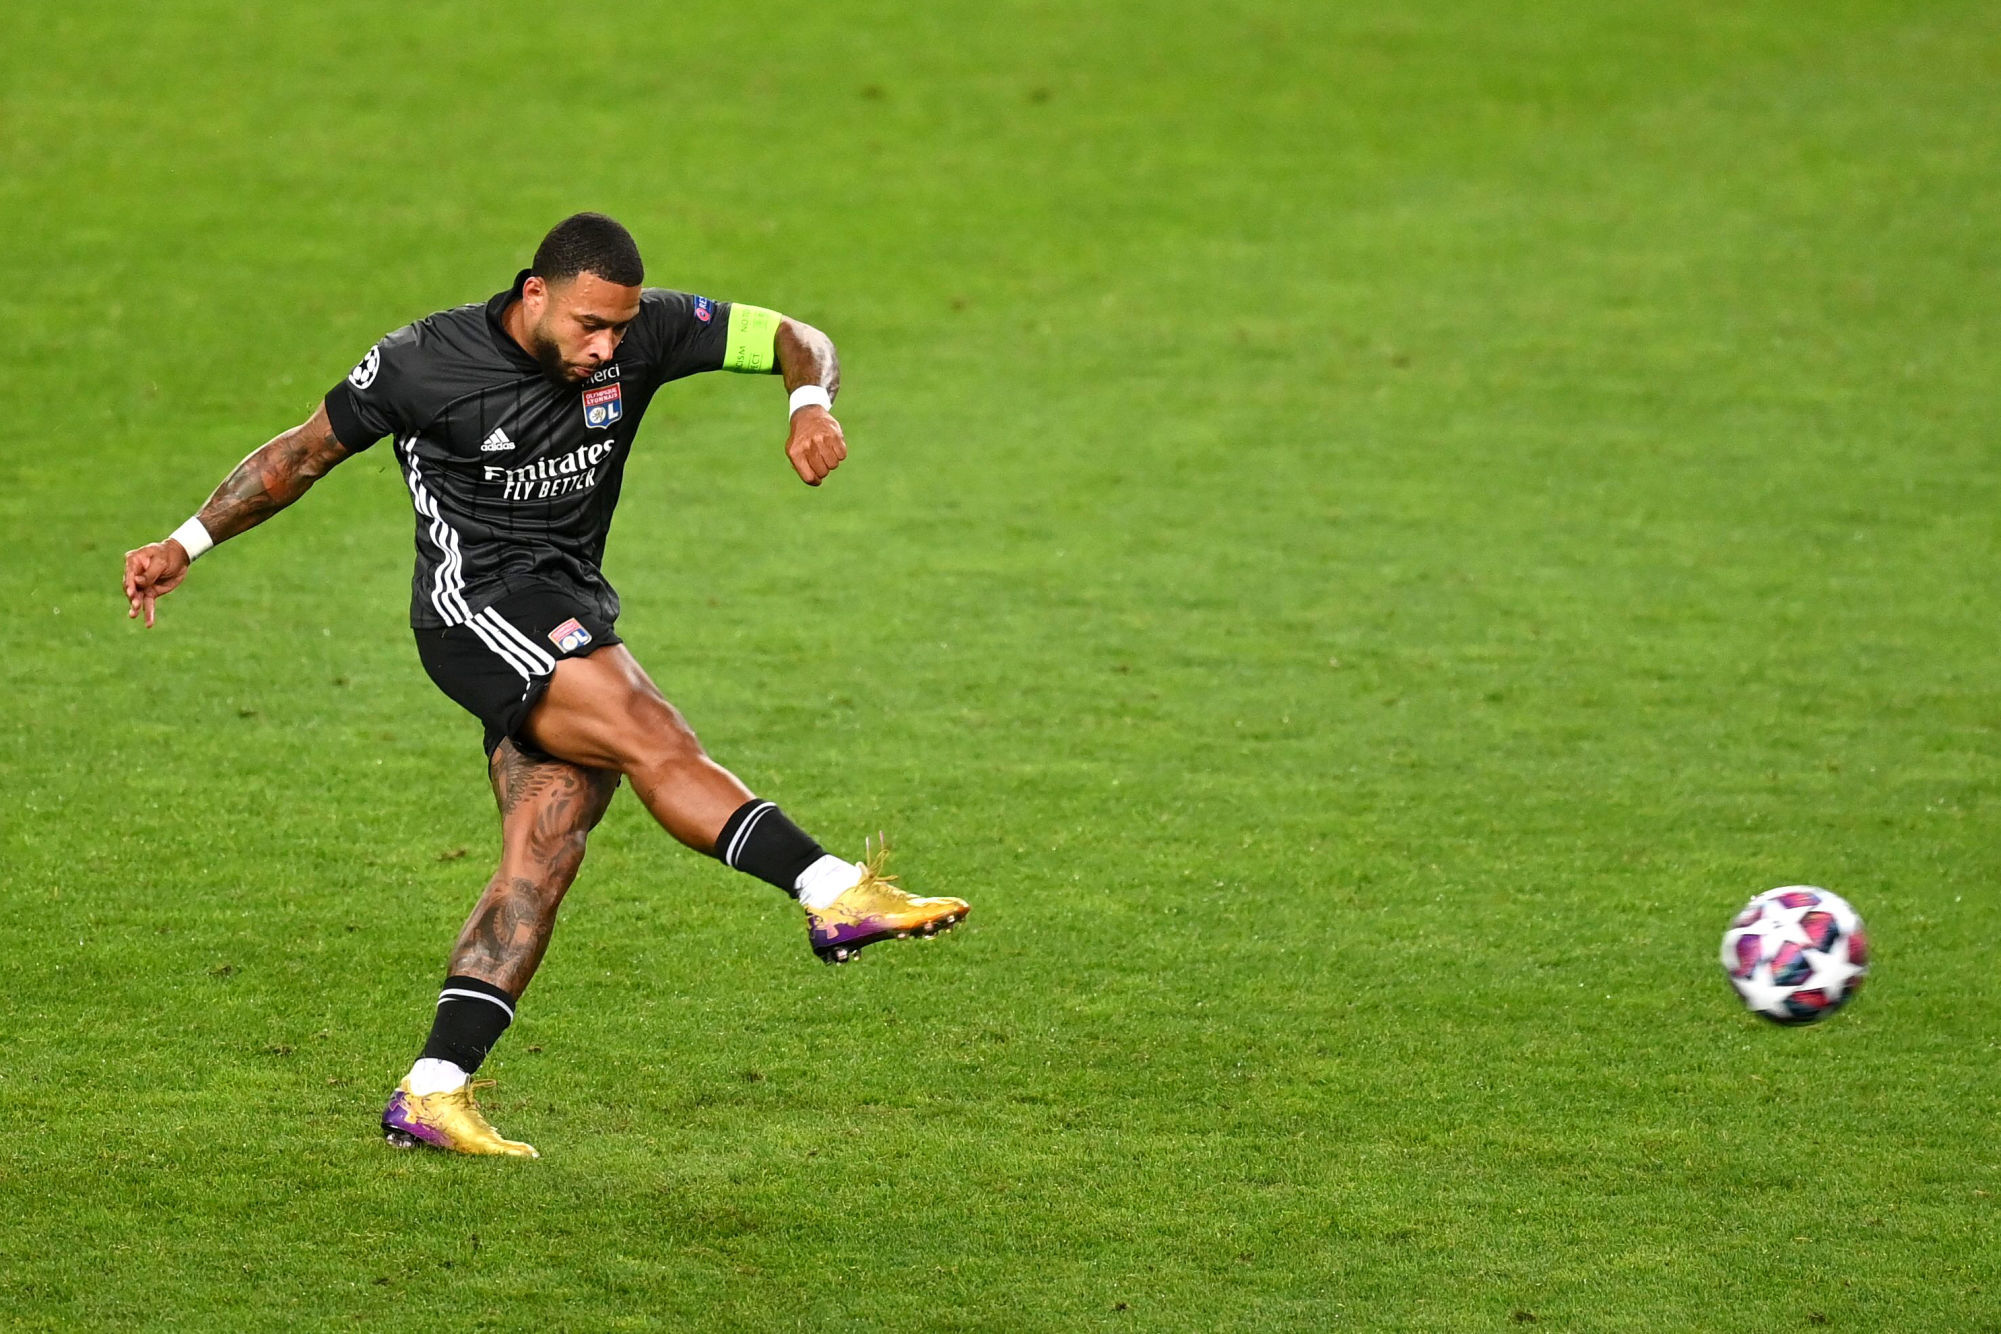 LISBON, PORTUGAL - AUGUST 15: Memphis Depay of Olympique Lyon passes the ball during the UEFA Champions League Quarter Final match between Manchester City and Lyon at Estadio Jose Alvalade on August 15, 2020 in Lisbon, Portugal. (Photo by Michael Regan - UEFA/UEFA via Getty Images) 
By Icon Sport - Estadio Jose Alvalade - Lisbonne (Portugal)